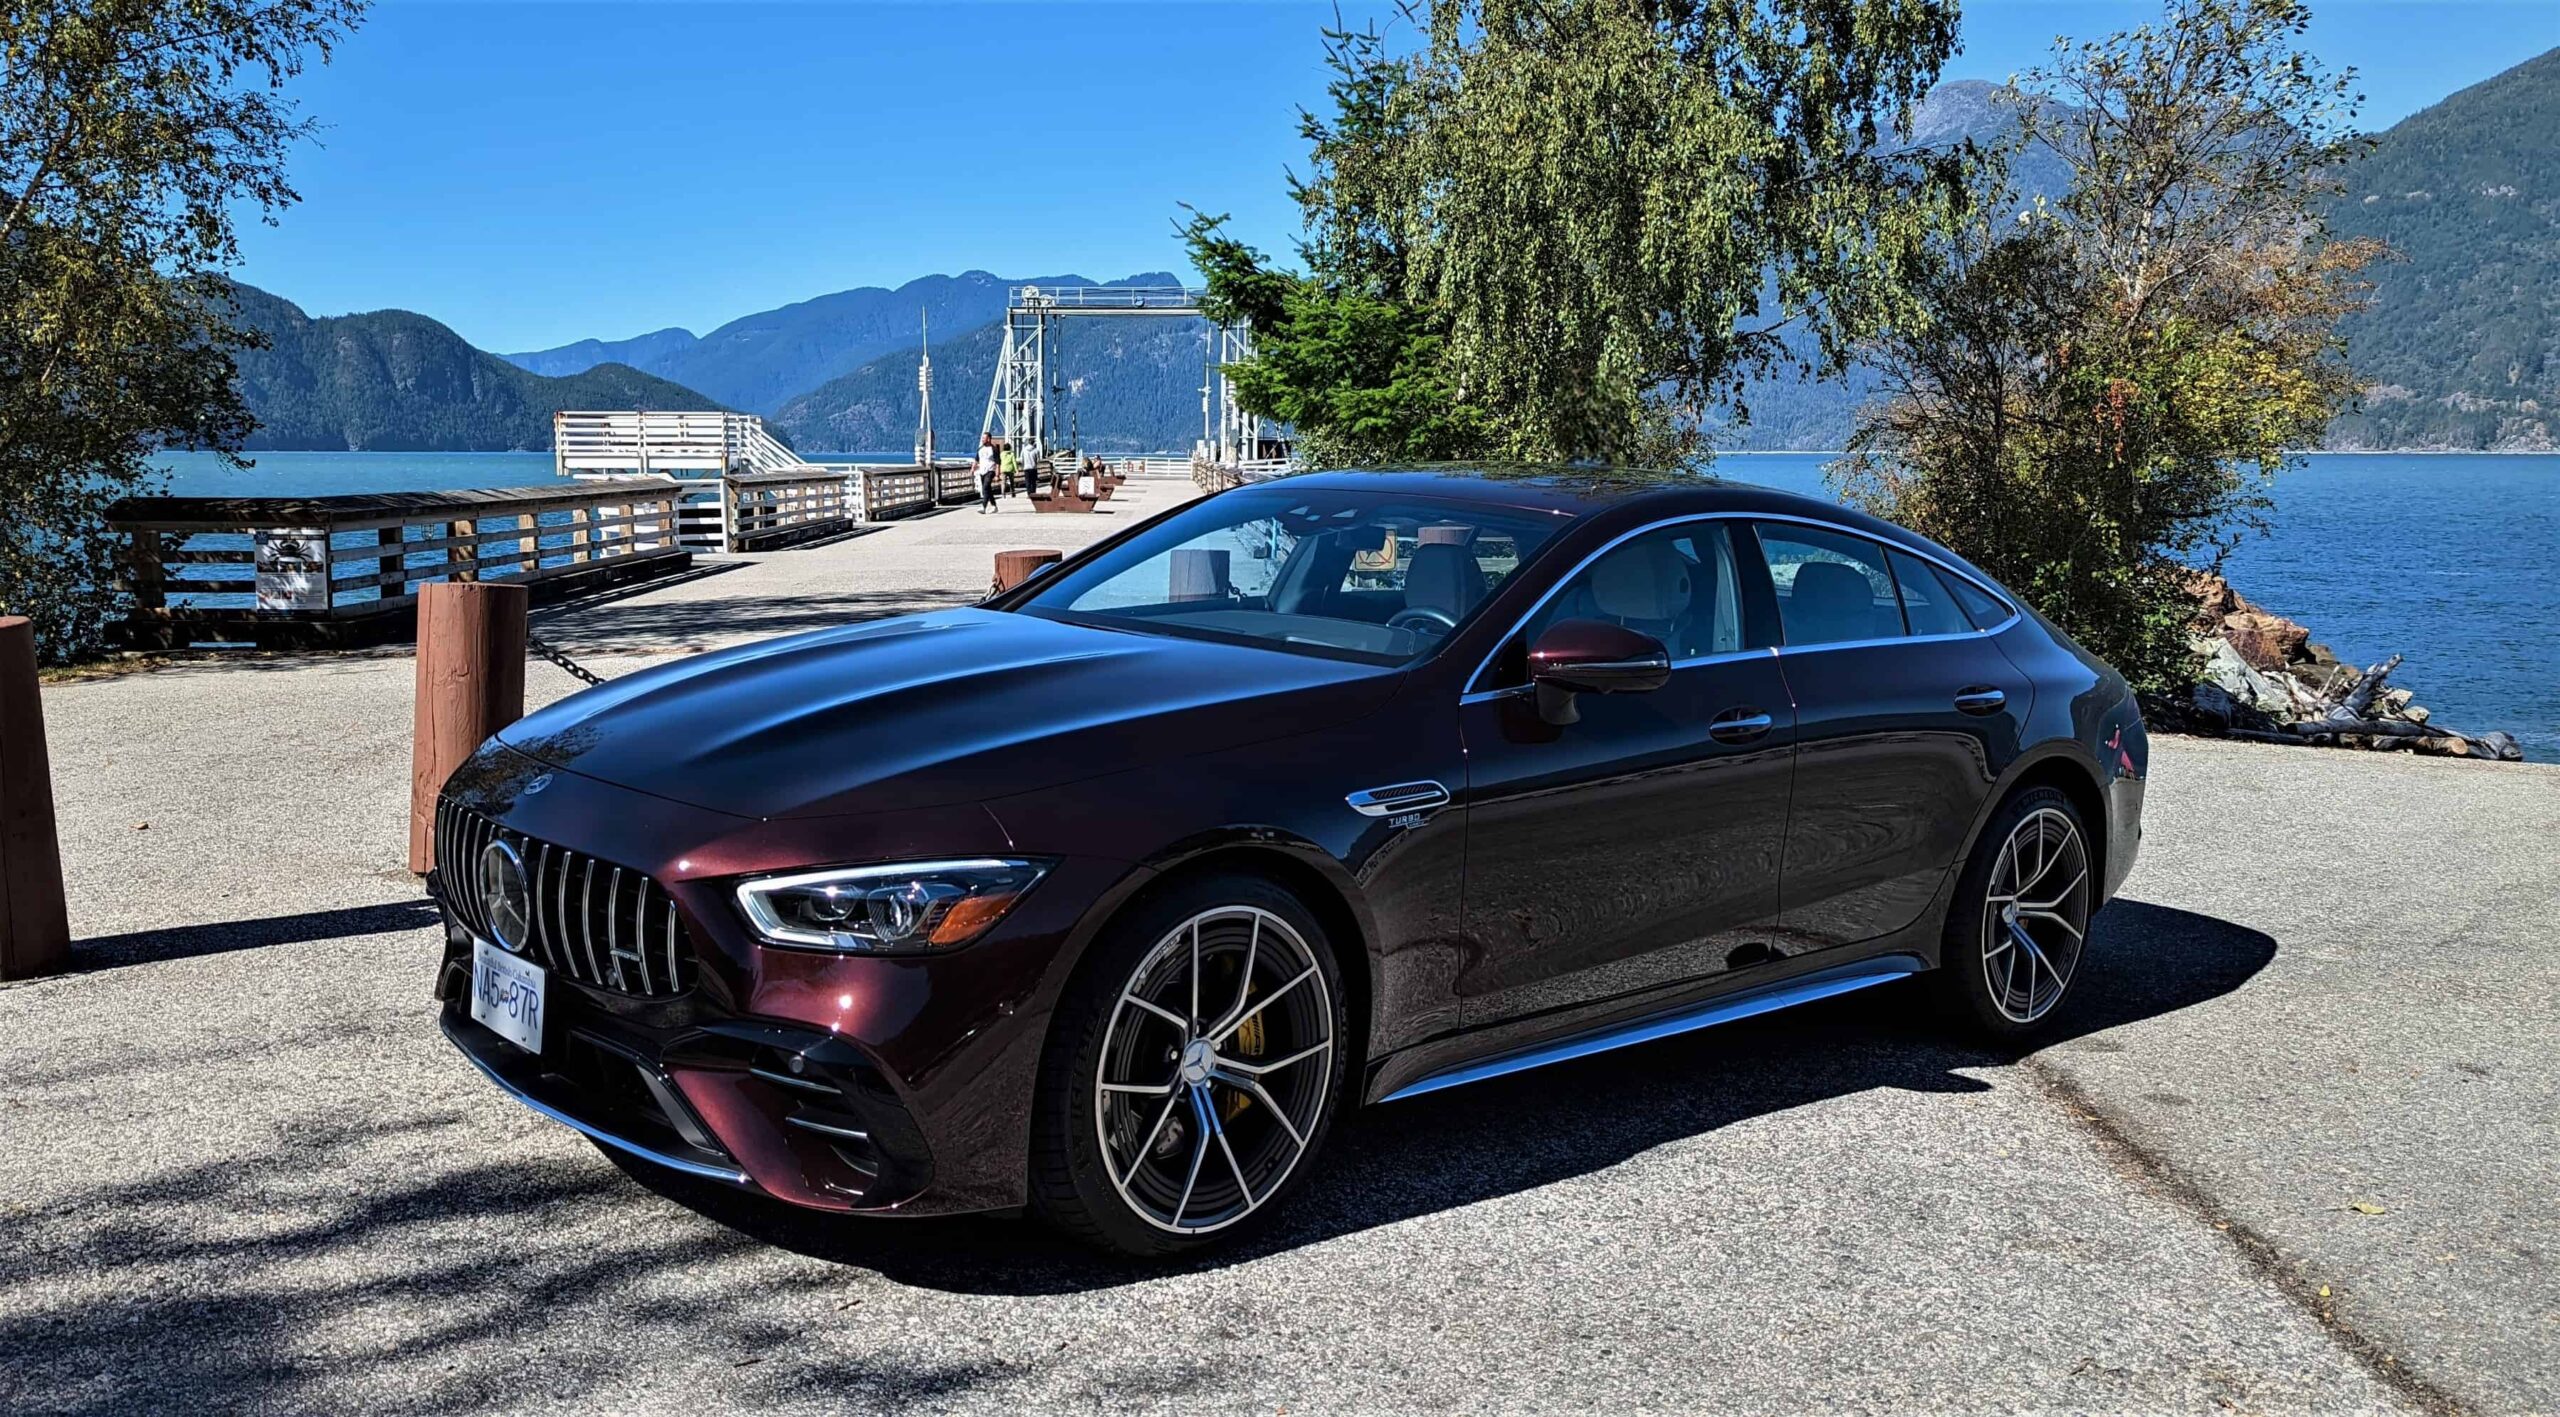 2022 Mercedes AMG GT 4 Door Coupe Review scaled